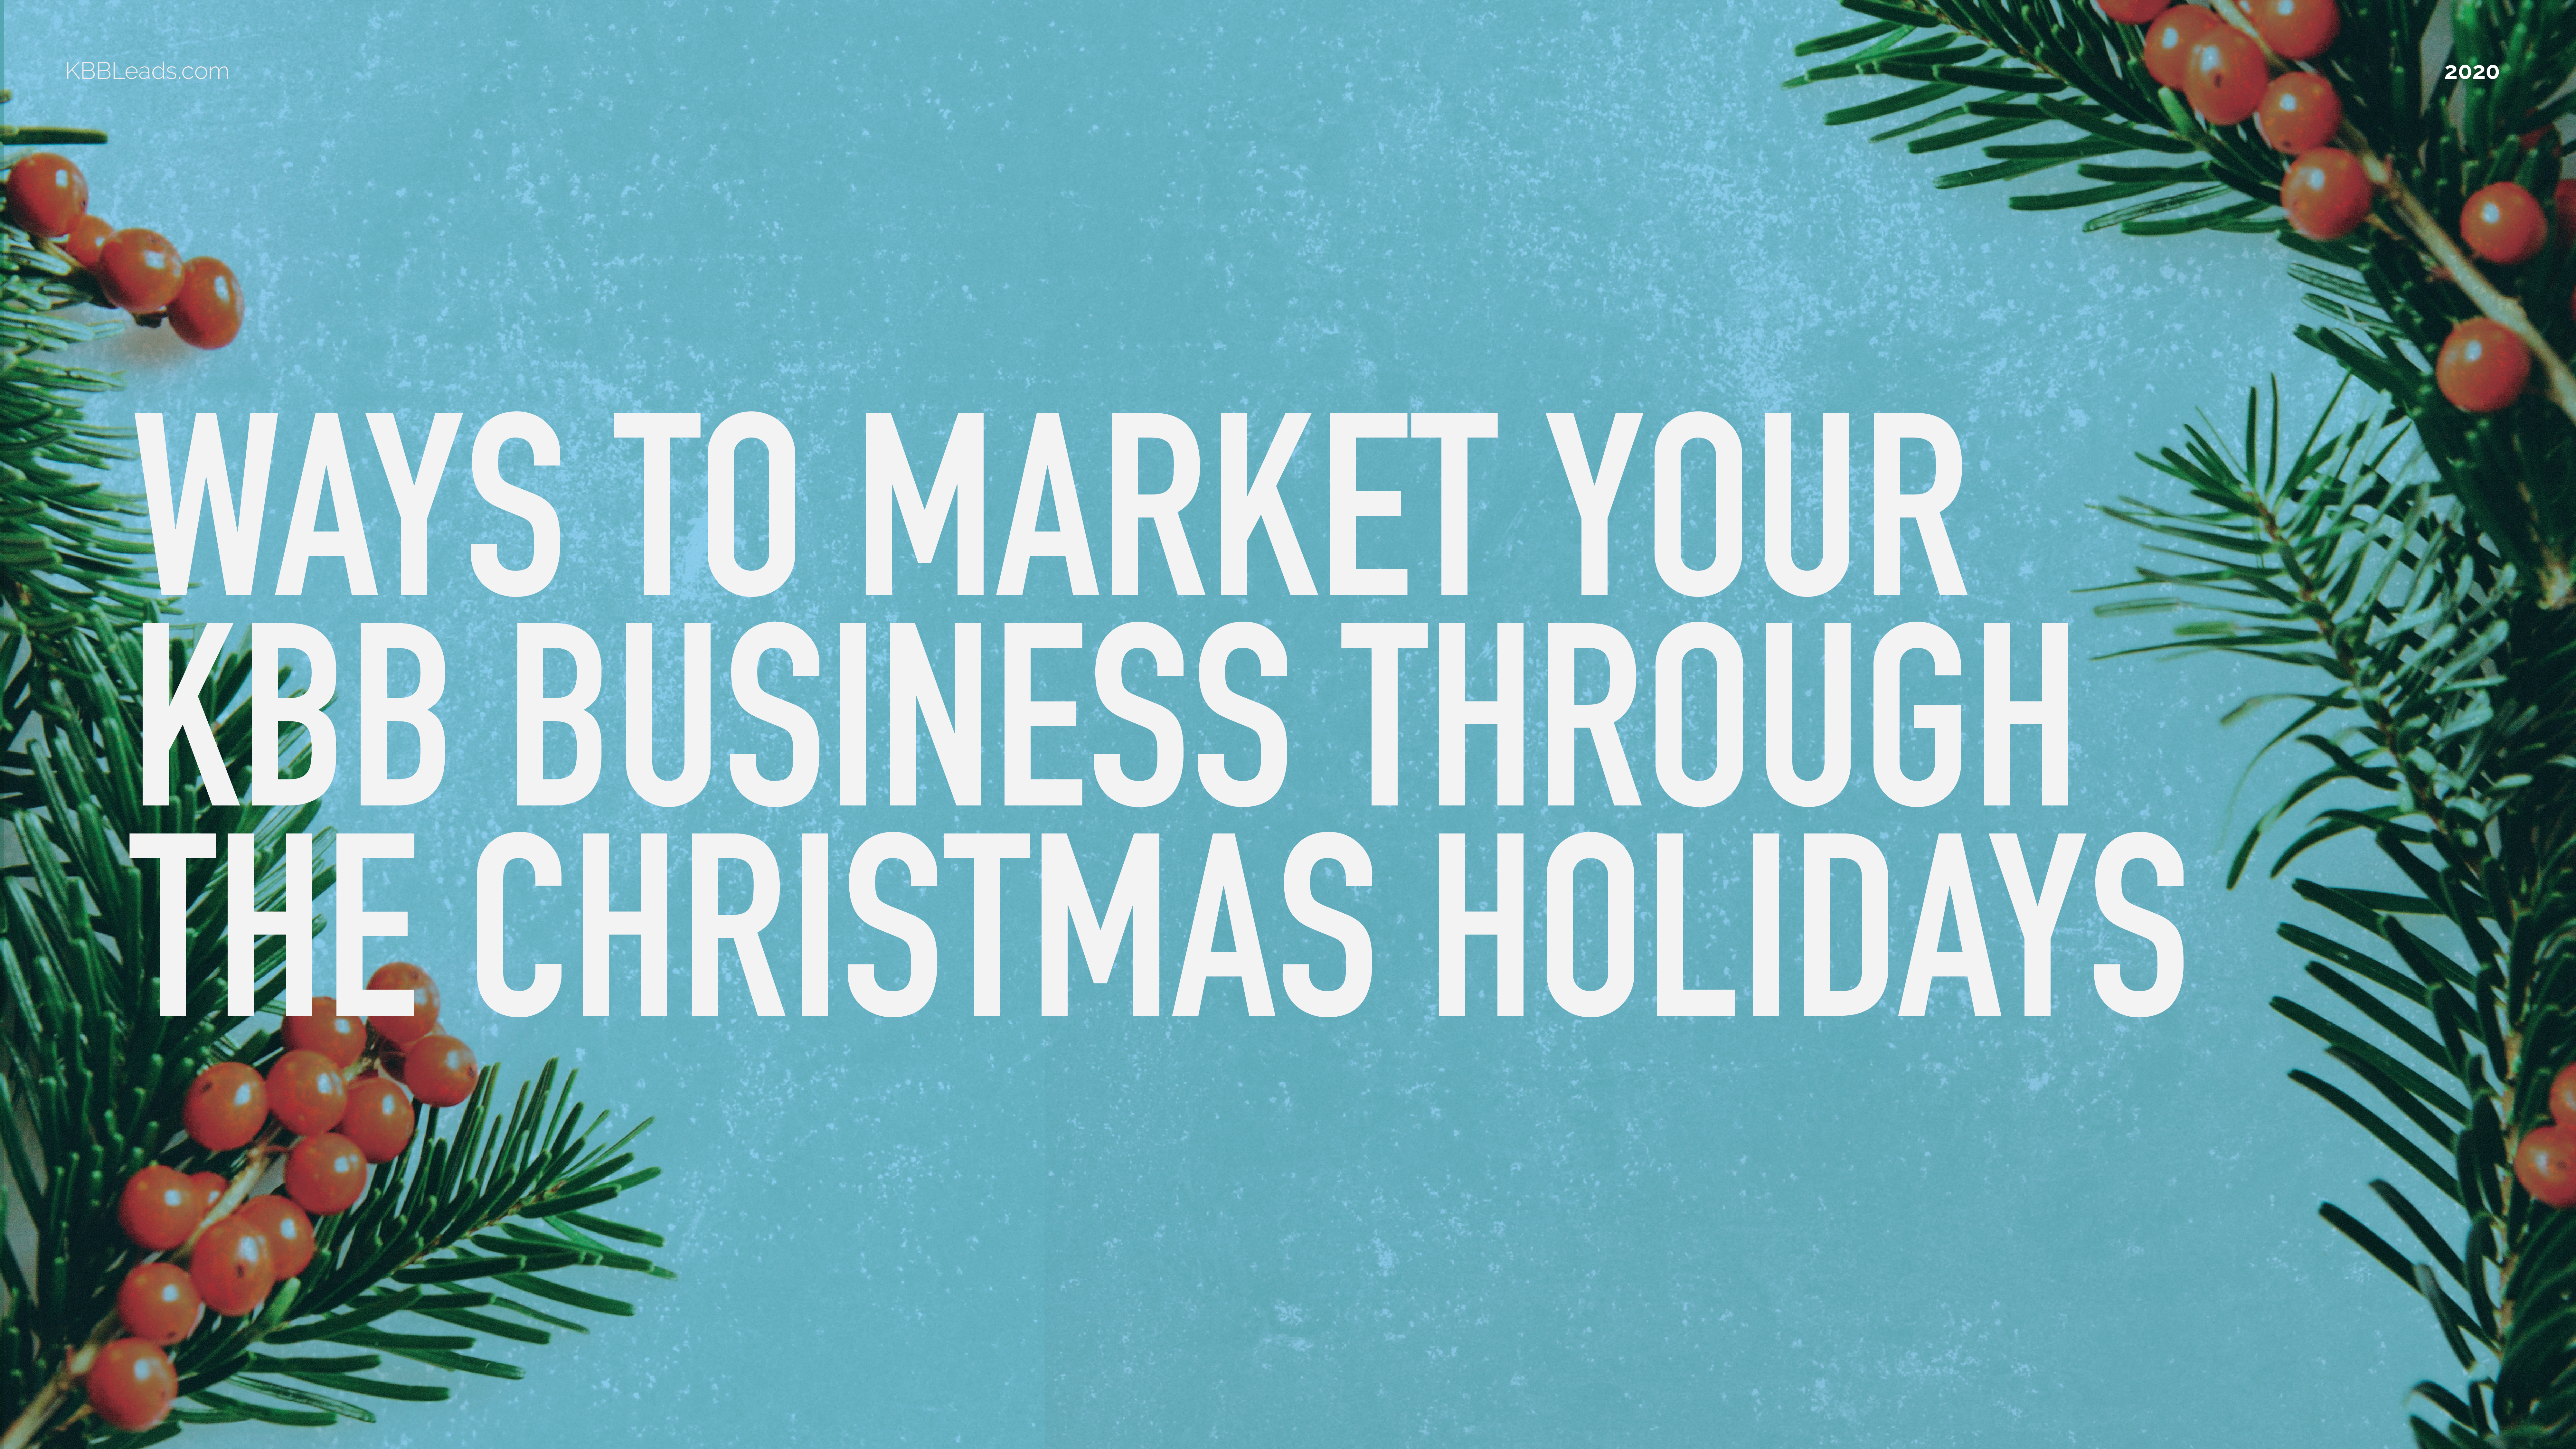 Market Your KBB Business Through The Christmas Period